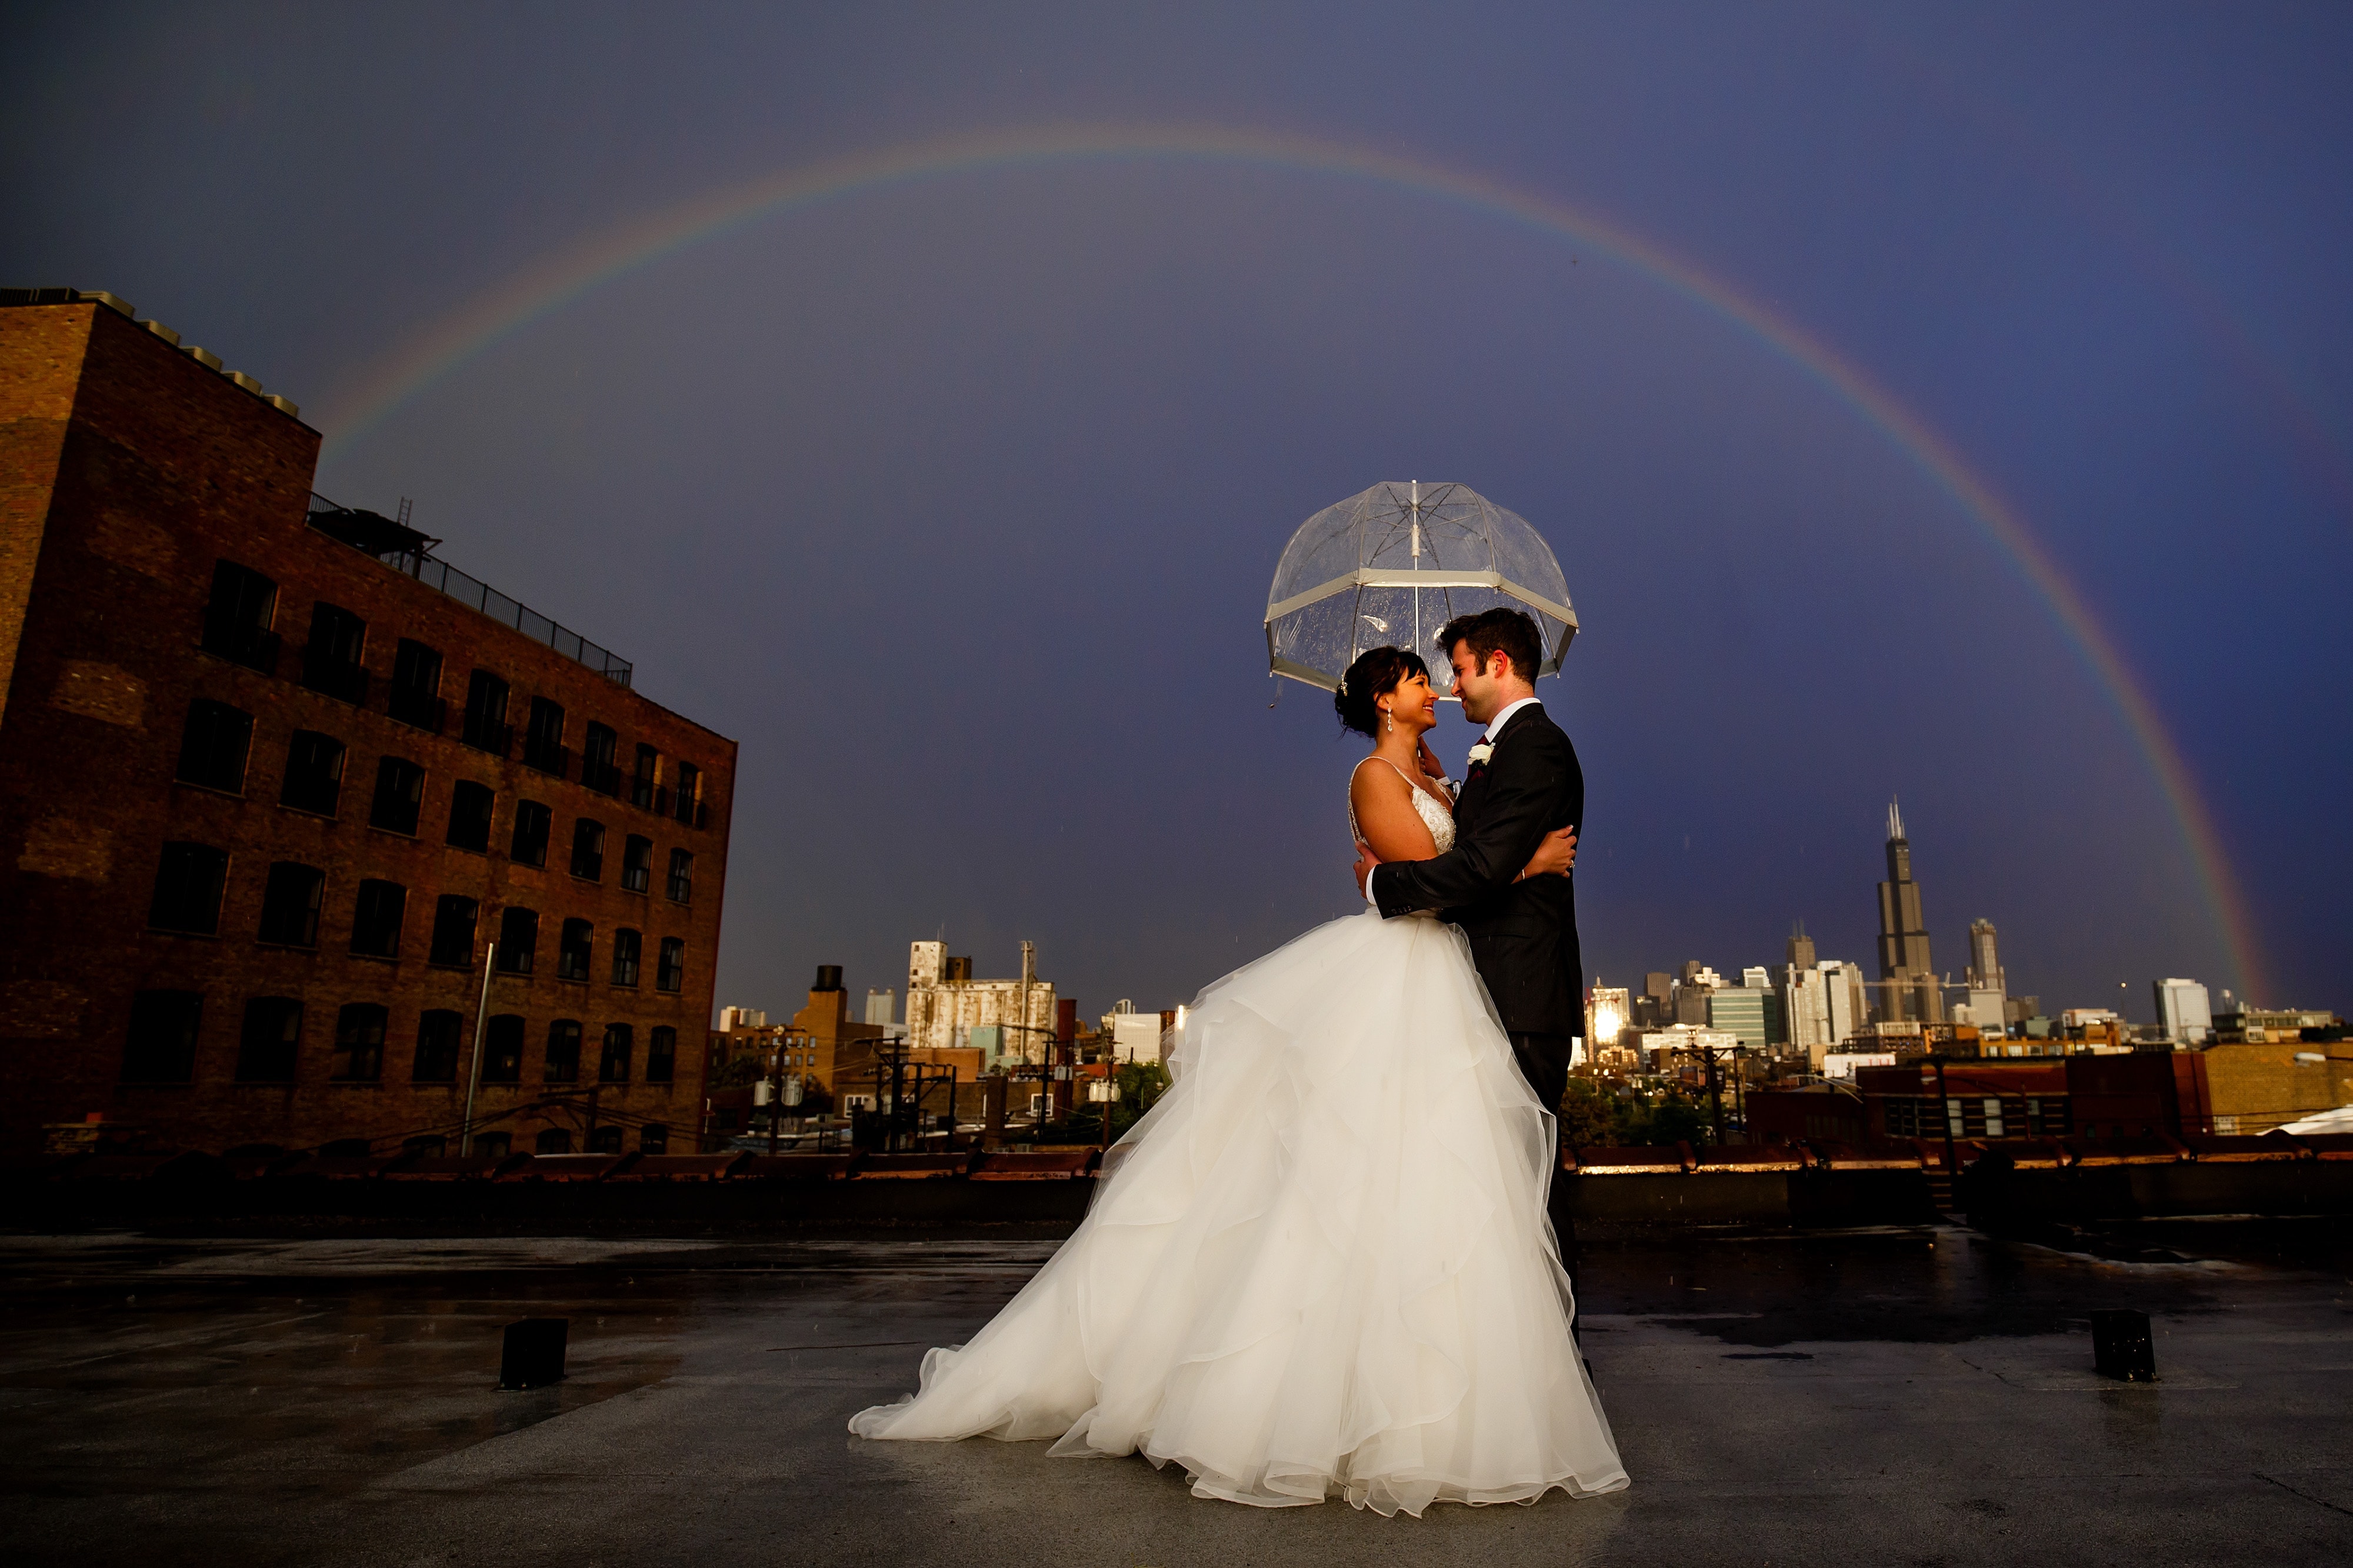 Chelsea and Ori embrace under an umbrella as they're surrounded by a rainbow on the rooftop during their Room 1520 wedding in Chicago